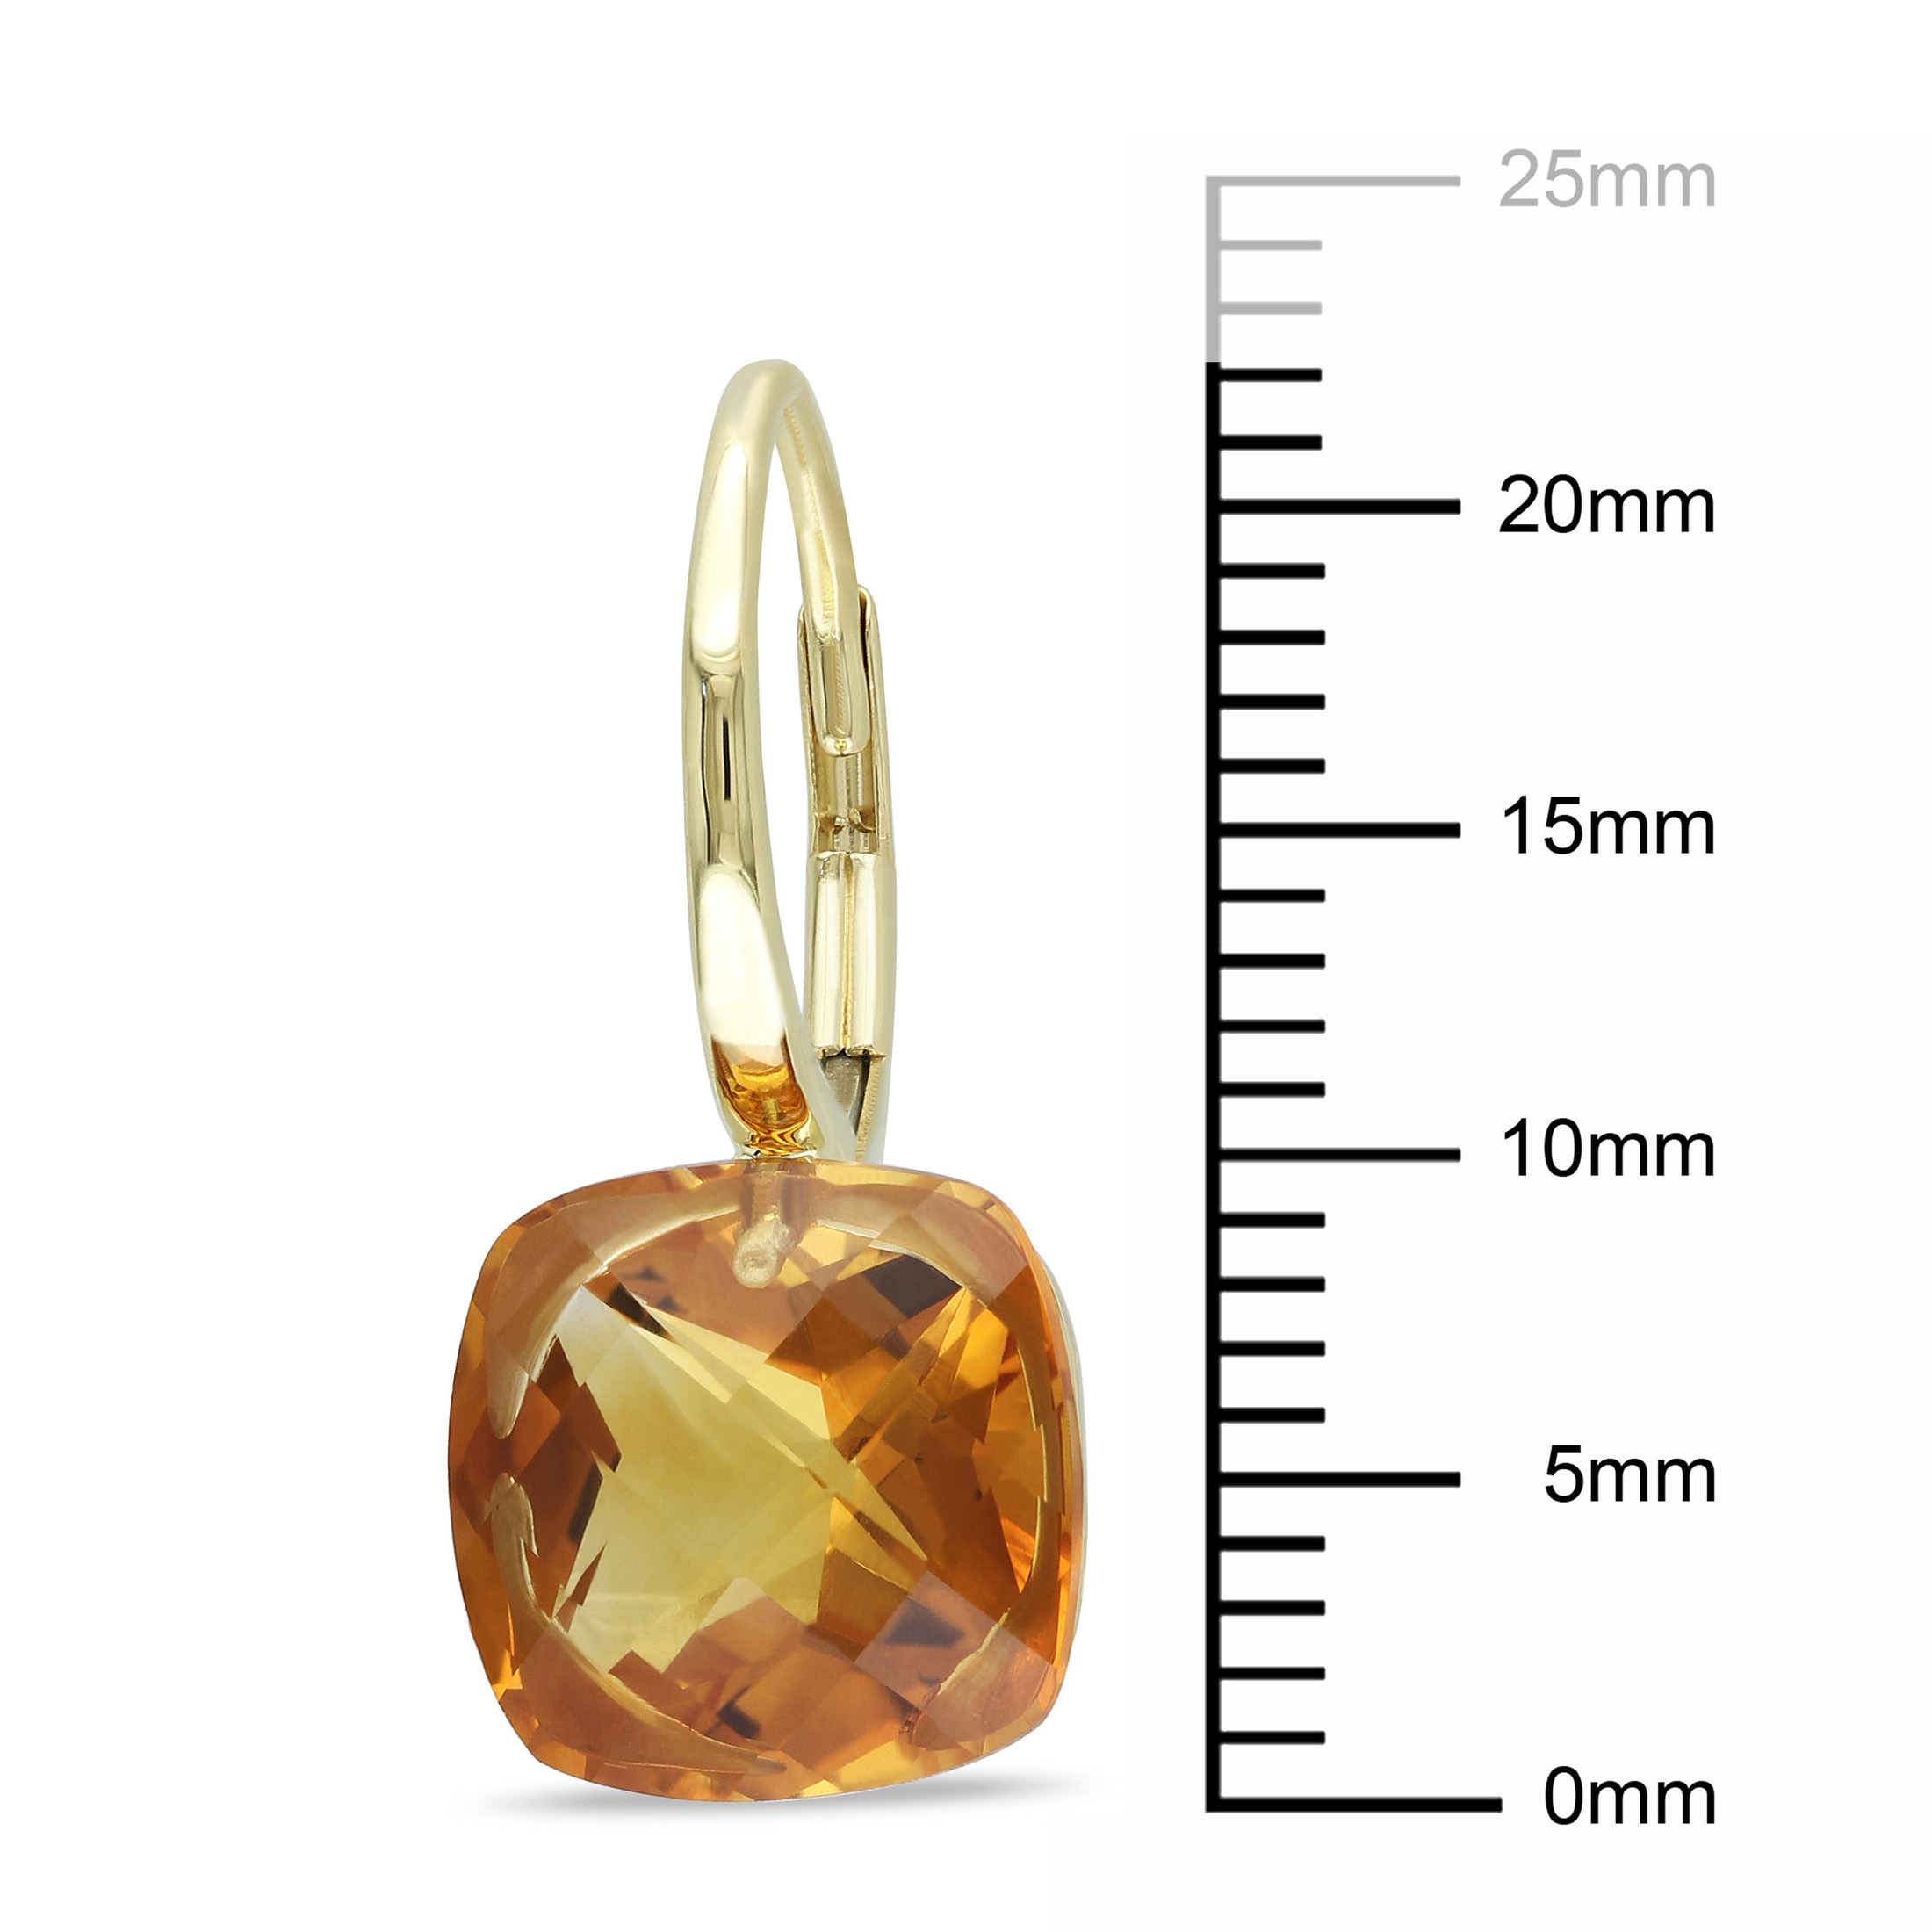 Miabella Women's 8 Carat T.G.W. Cushion-Cut Checkerboard Madeira Citrine 14kt Yellow Gold Leverback Earrings - image 2 of 6